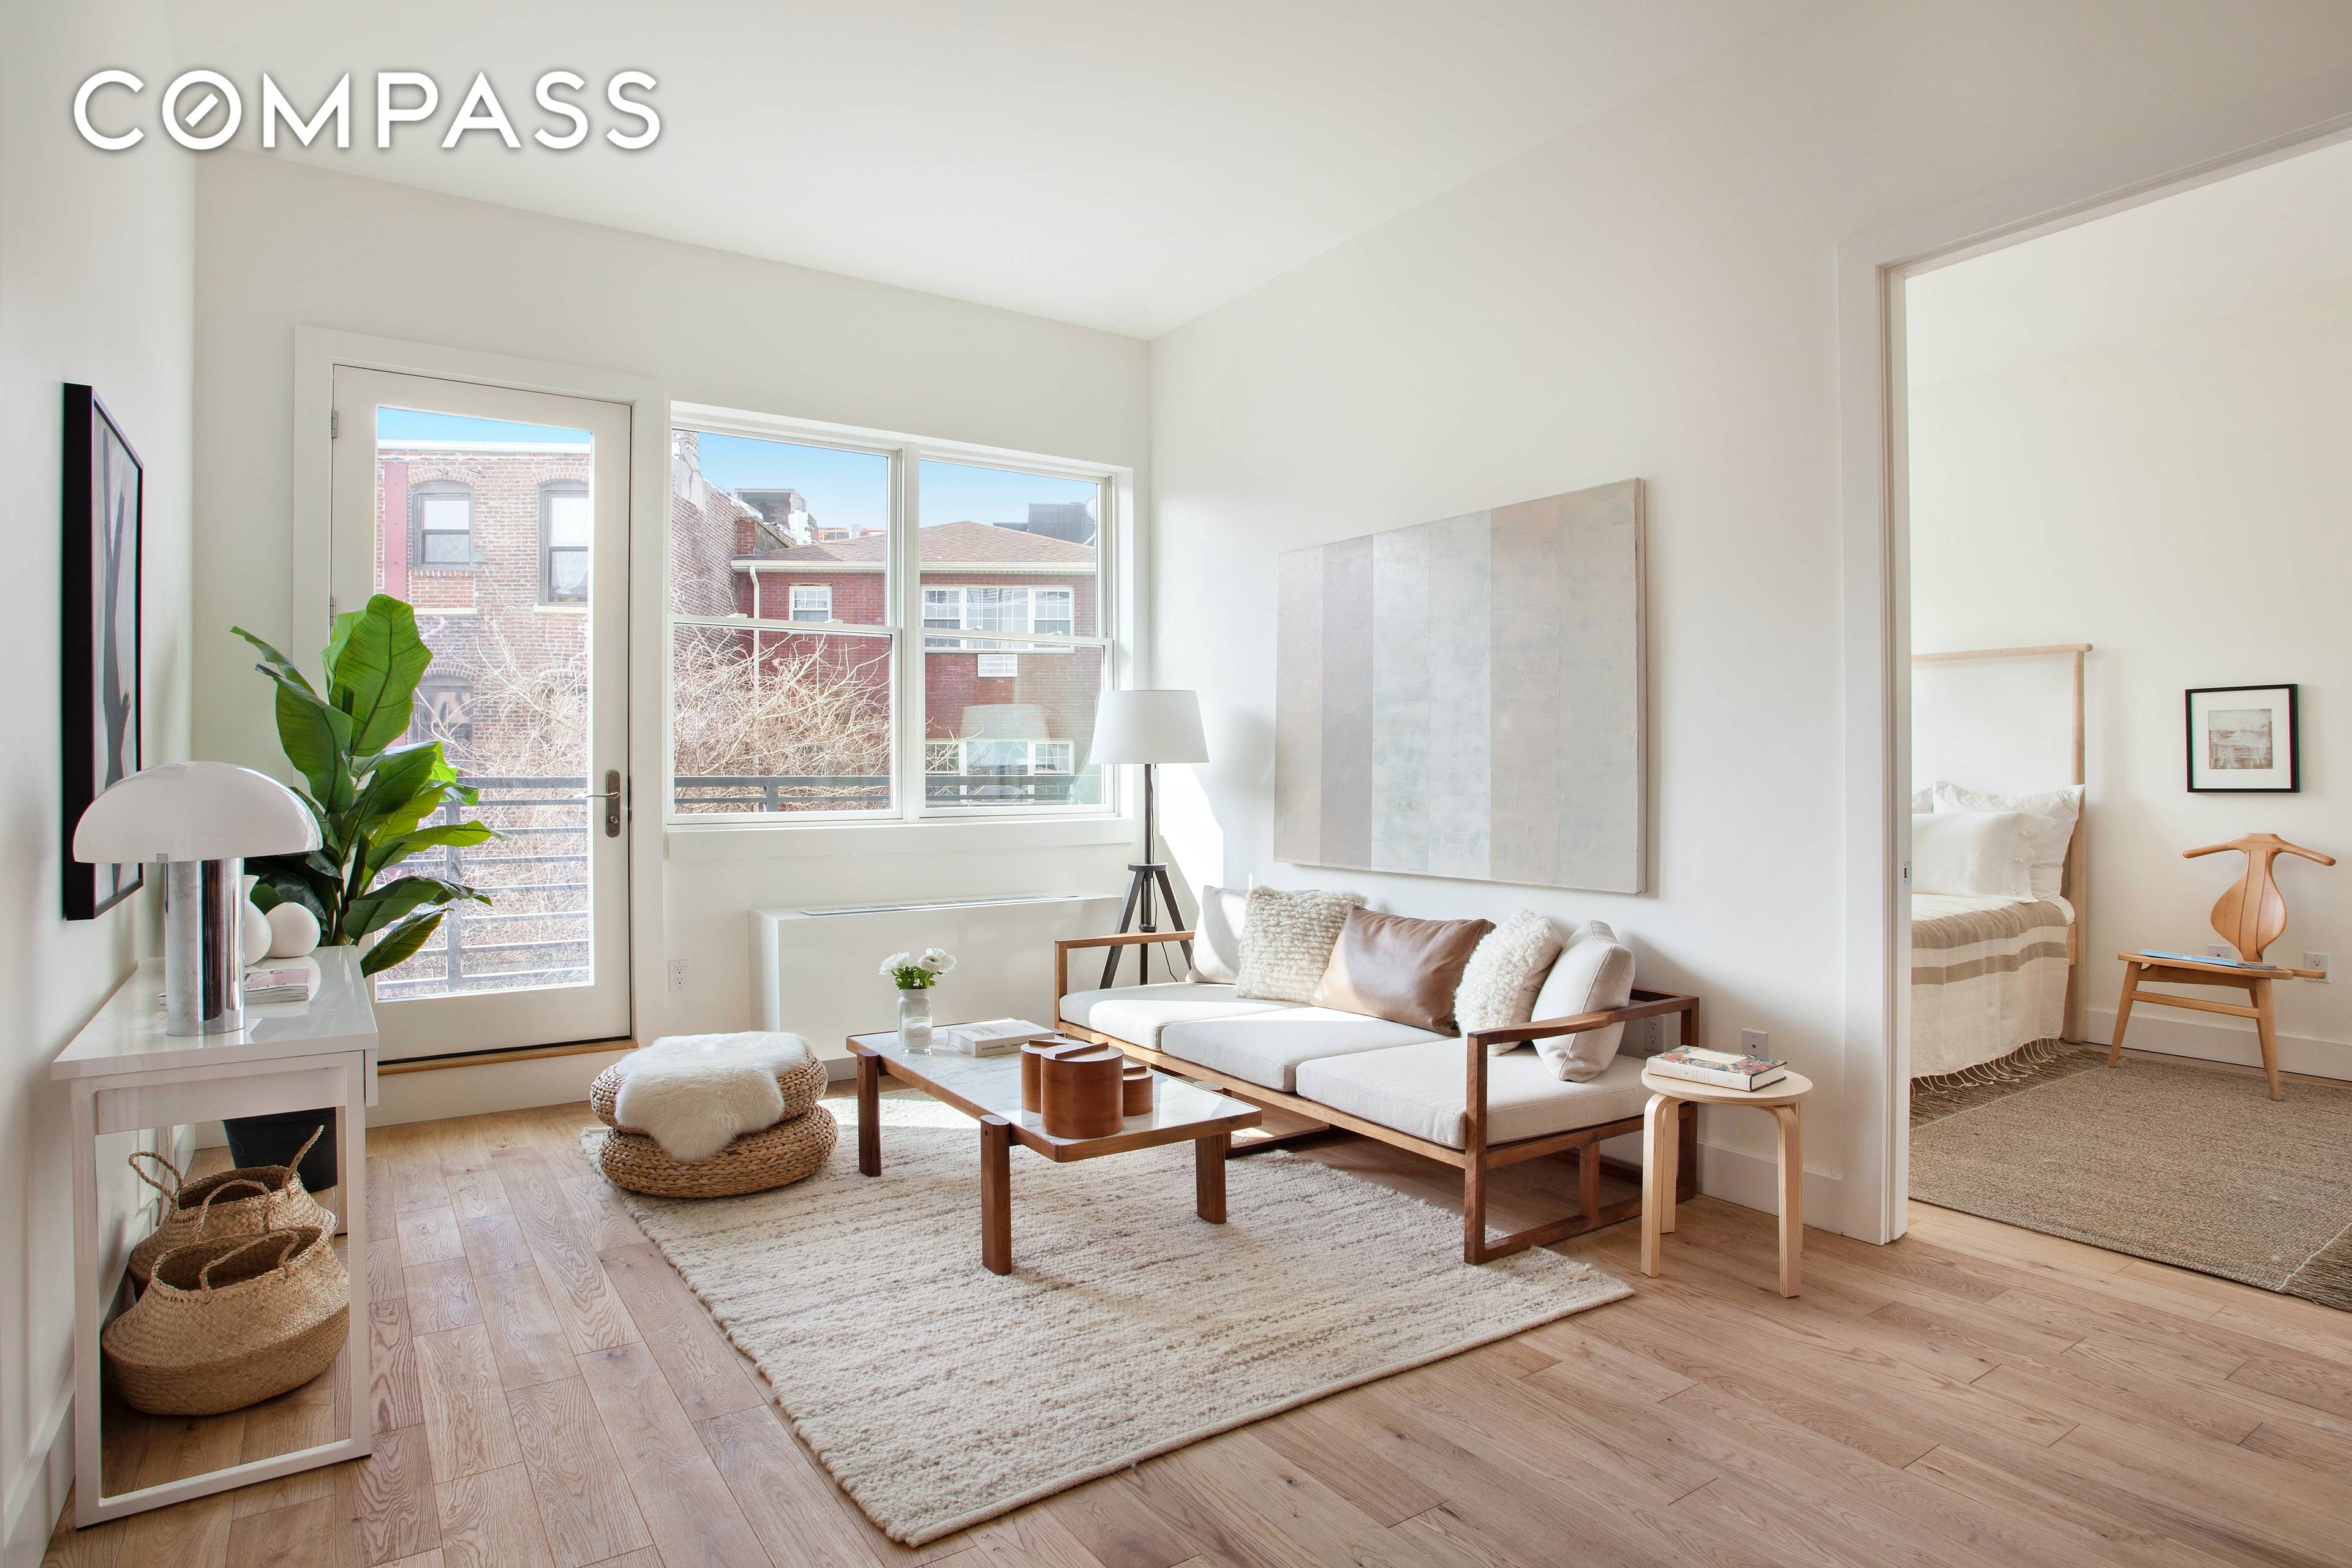 Prospect Heights No Fee Luxury Sun Filled 2BD 2BA with Private Balcony, loft like 10 6 Ceilings, Oversized Windows, Open Kitchen with S S Kitchen with D W, M W, ...